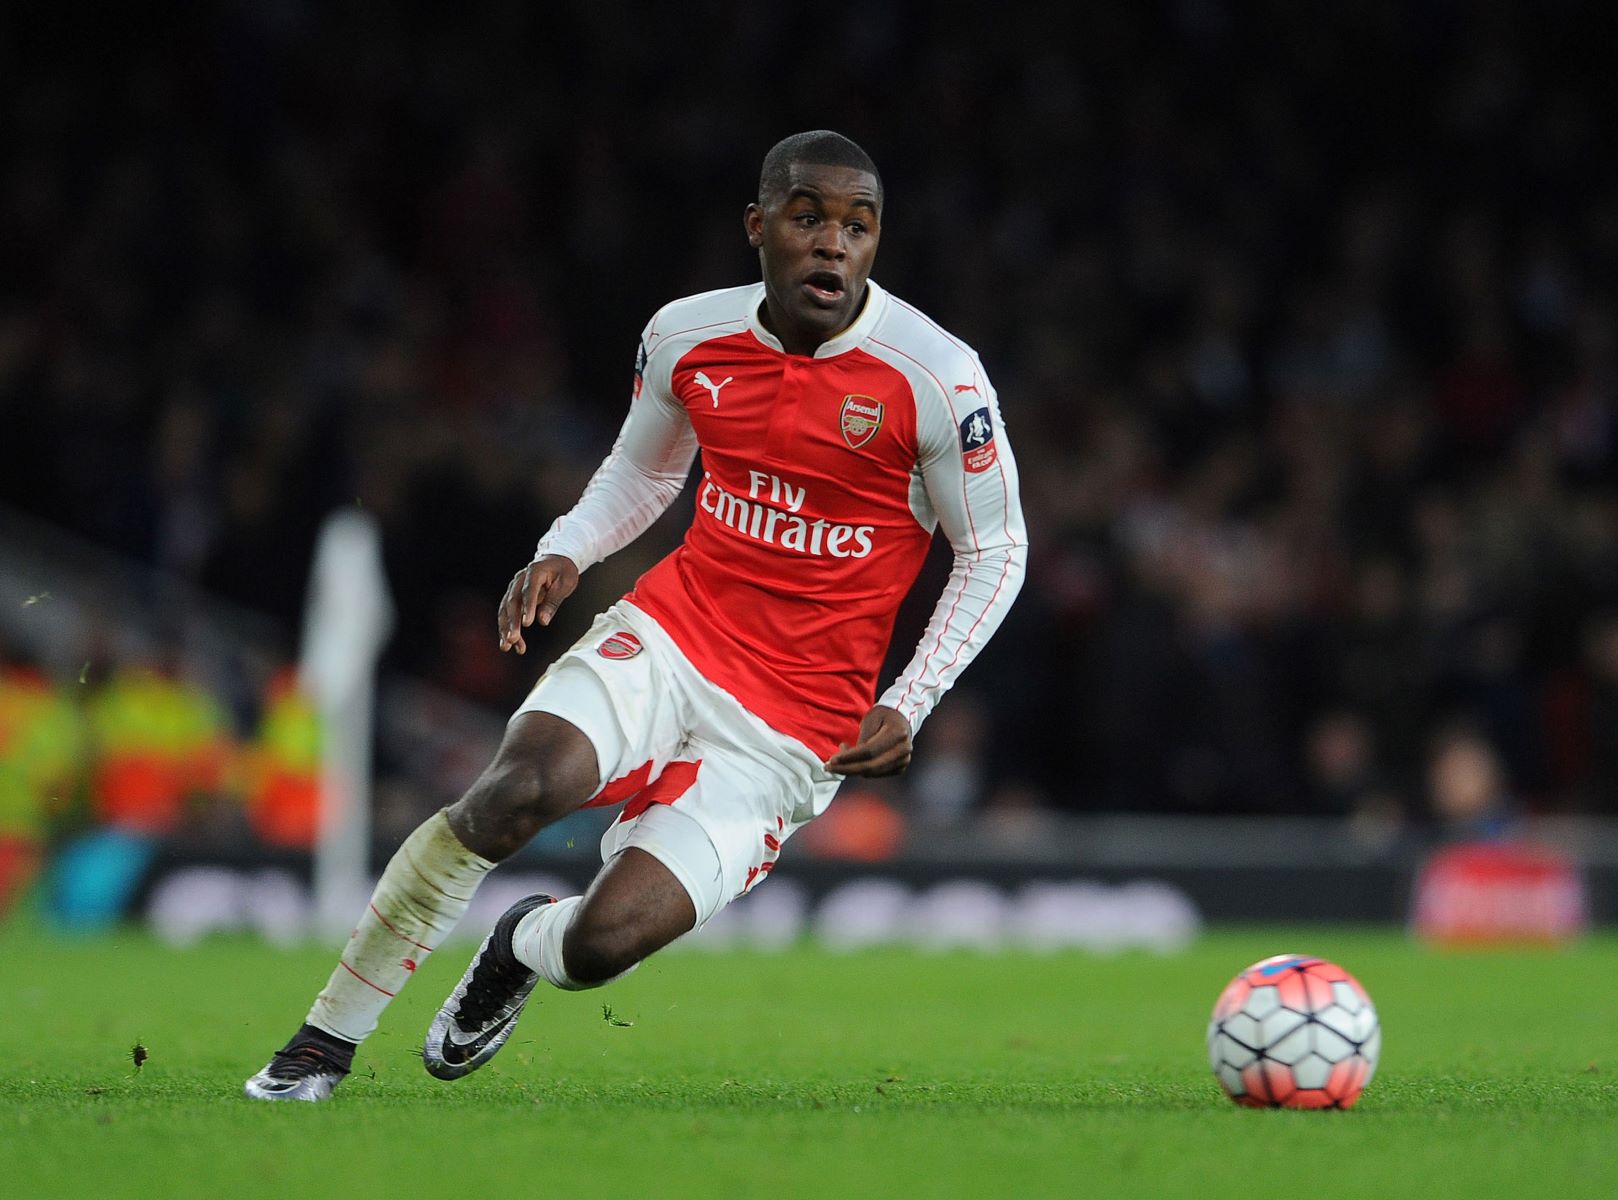 17-astonishing-facts-about-joel-campbell